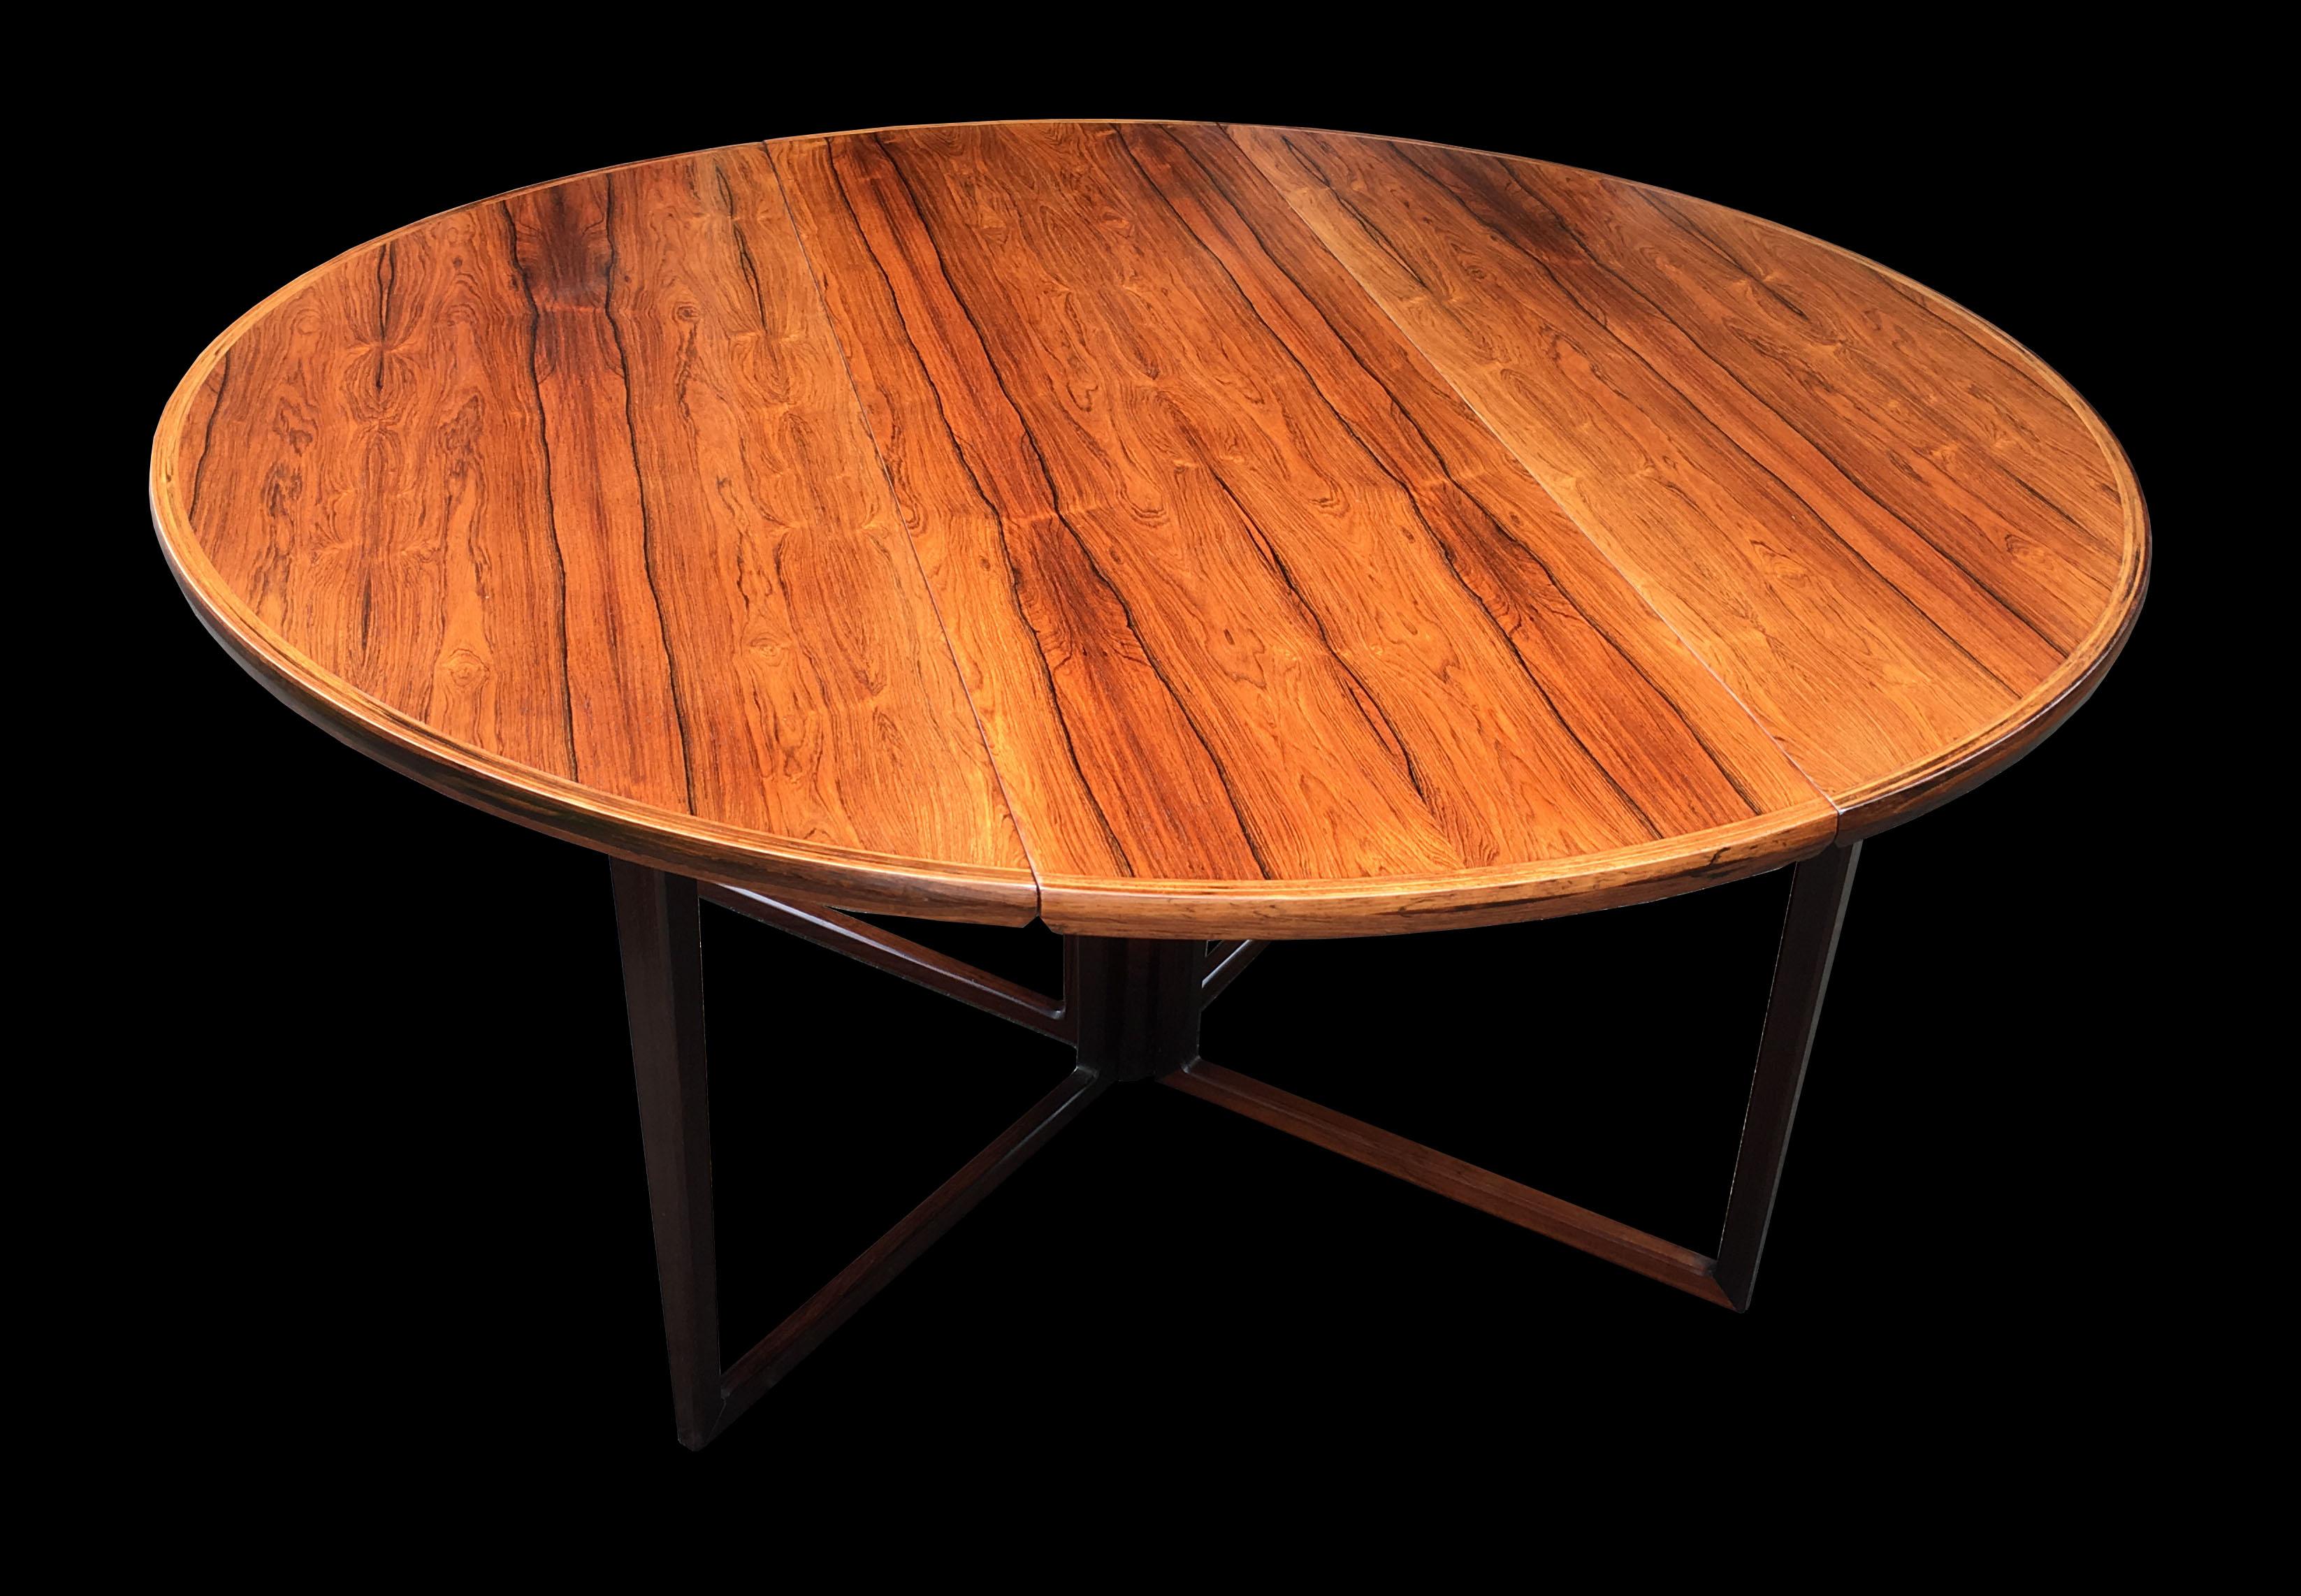 A stunning original table by this very important designer, Helge Sibast and later cabinetmaker for other designers such as Arne Vodder. This table is in untouched beautiful condition.